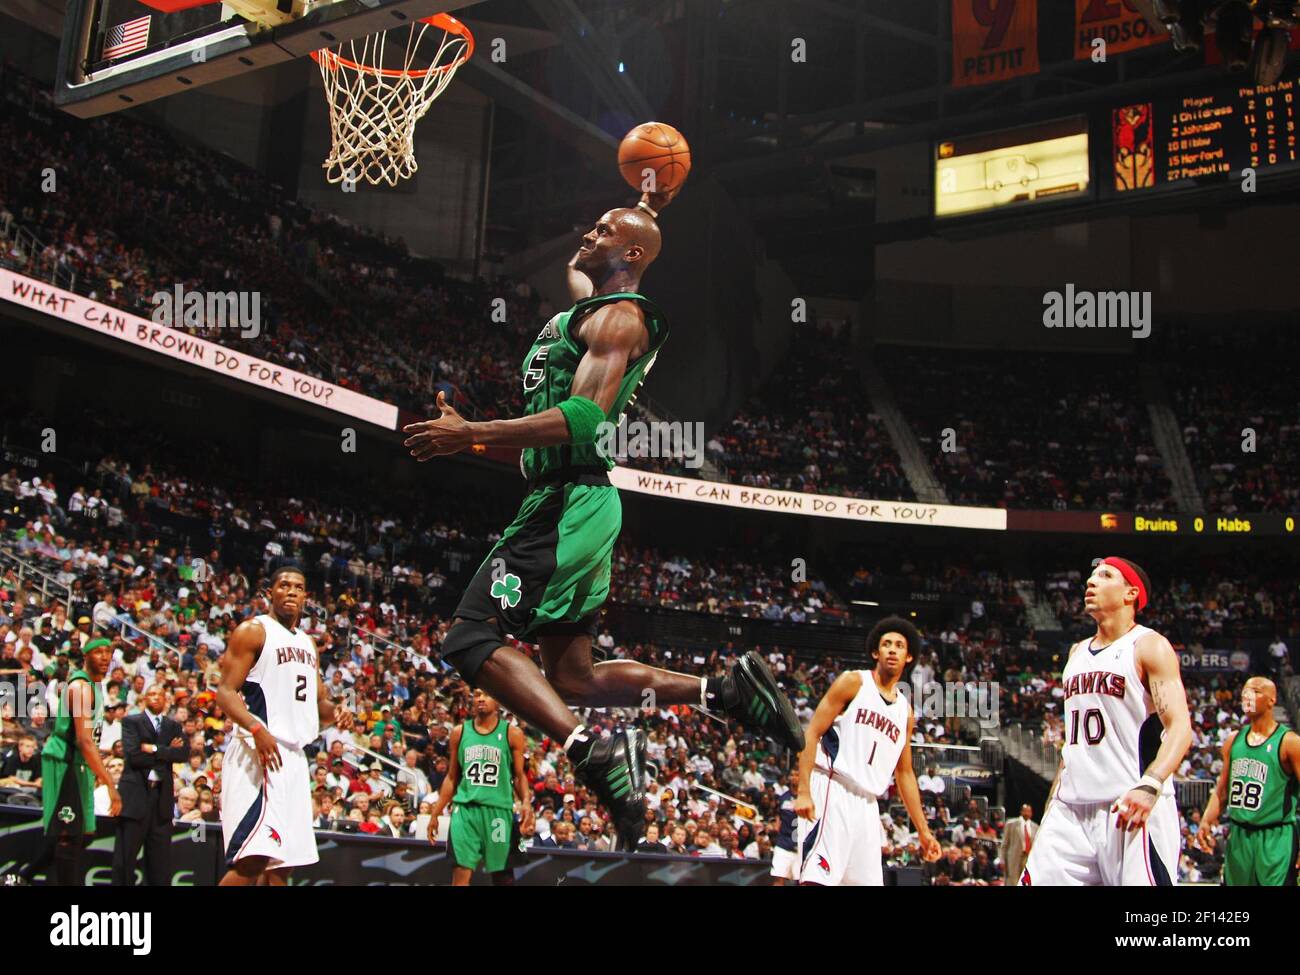 Boston Celtics forward Kevin Garnett goes up for a monstrous dunk at against the Atlanta Hawks during the second quarter at Philips Arena in Atlanta, Georgia, Saturday, April 12, 2008. (Photo by Pouya Dianat/Atlanta Journal-Constitution/MCT/Sipa USA) Stock Photo